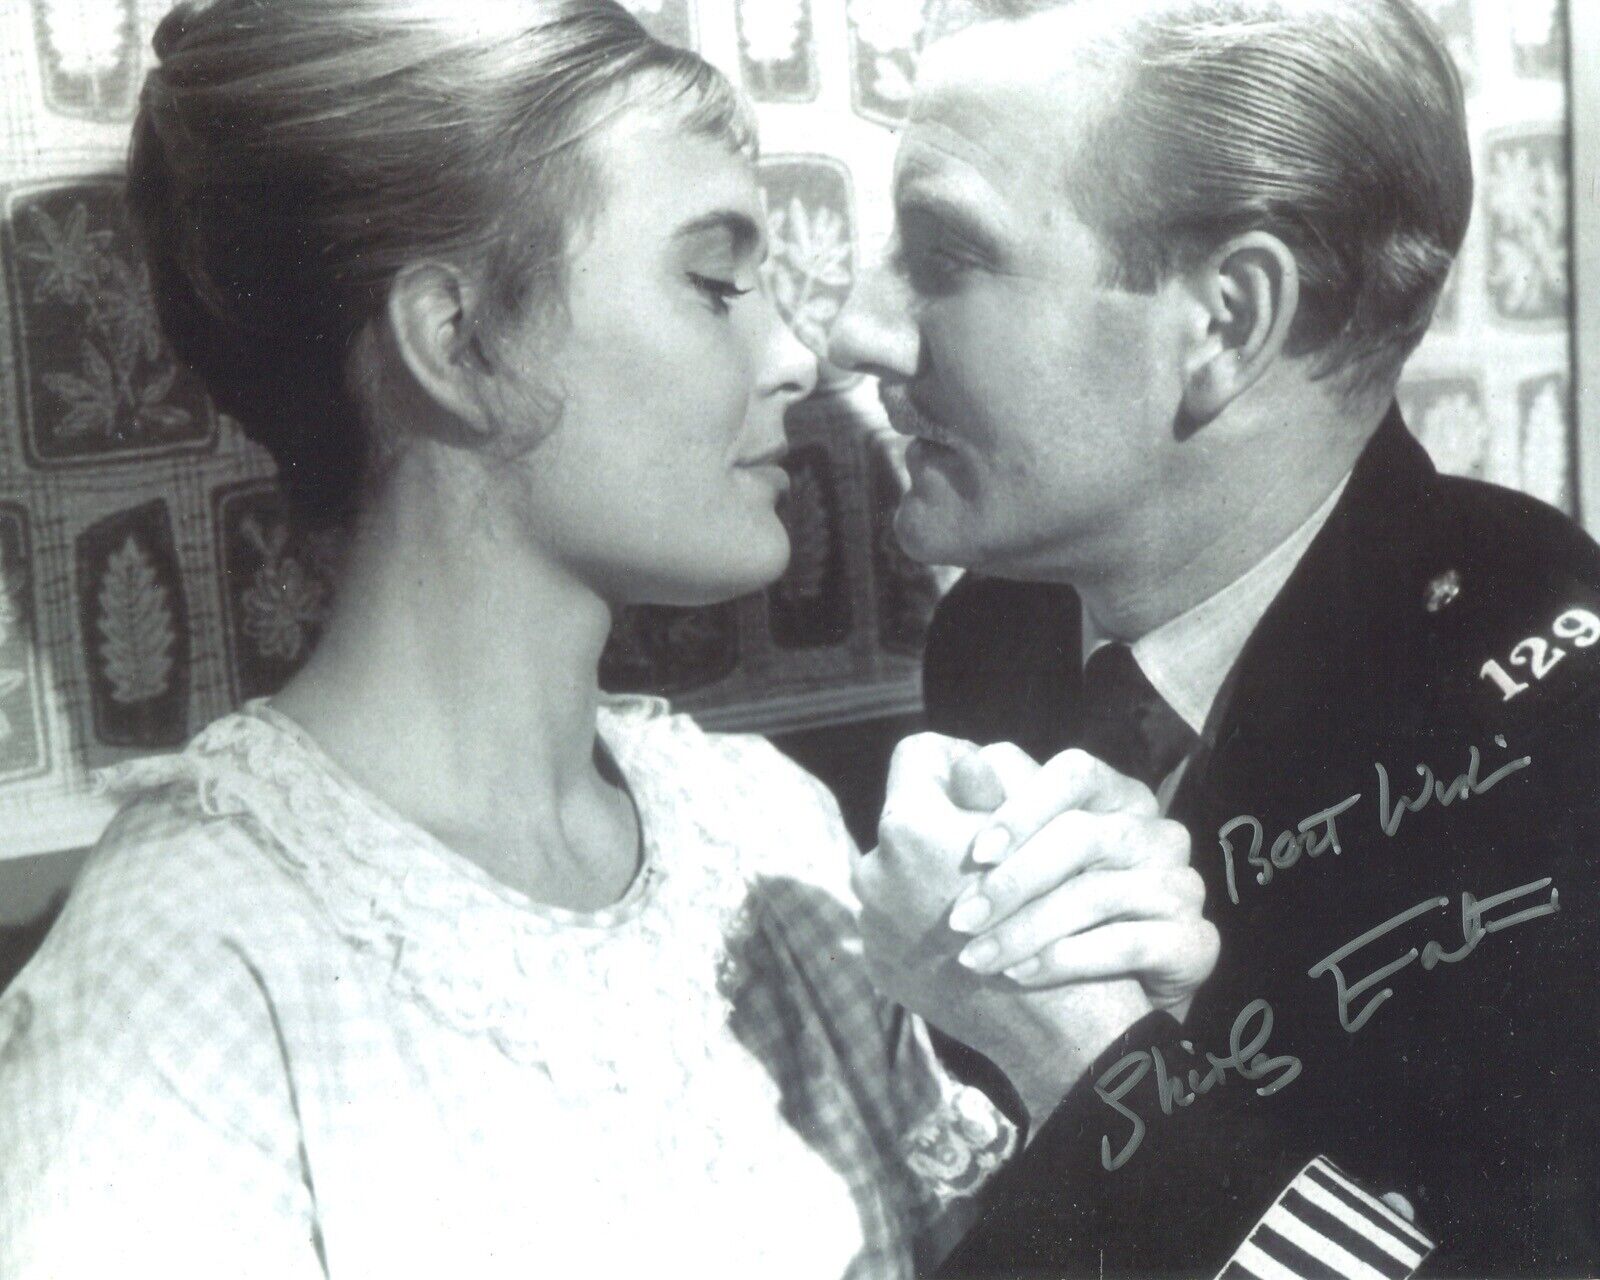 007 Bond girl SHIRLEY EATON signed CARRY ON SERGEANT movie Photo Poster painting - UACC DEALER